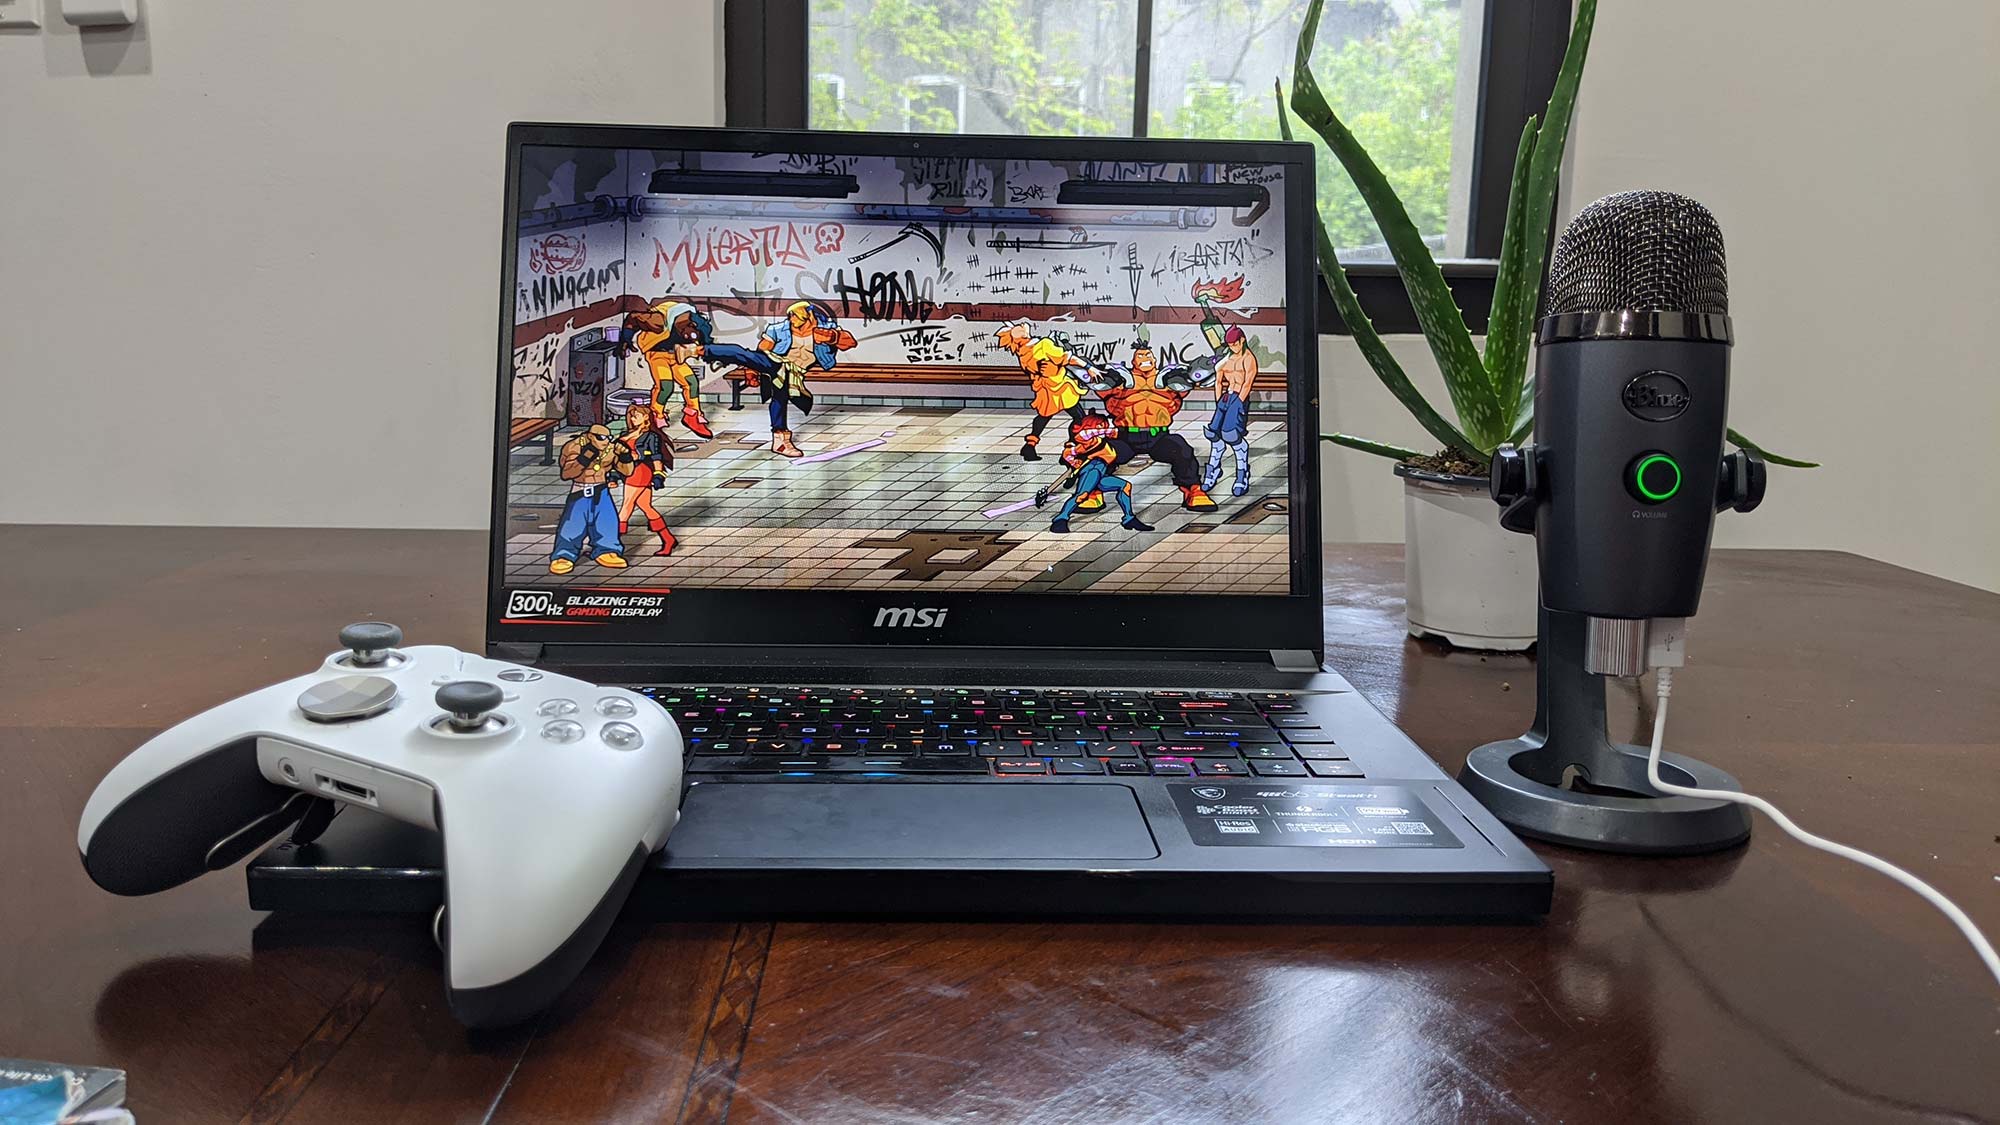 How To Connect Xbox Controller To Gaming Laptop